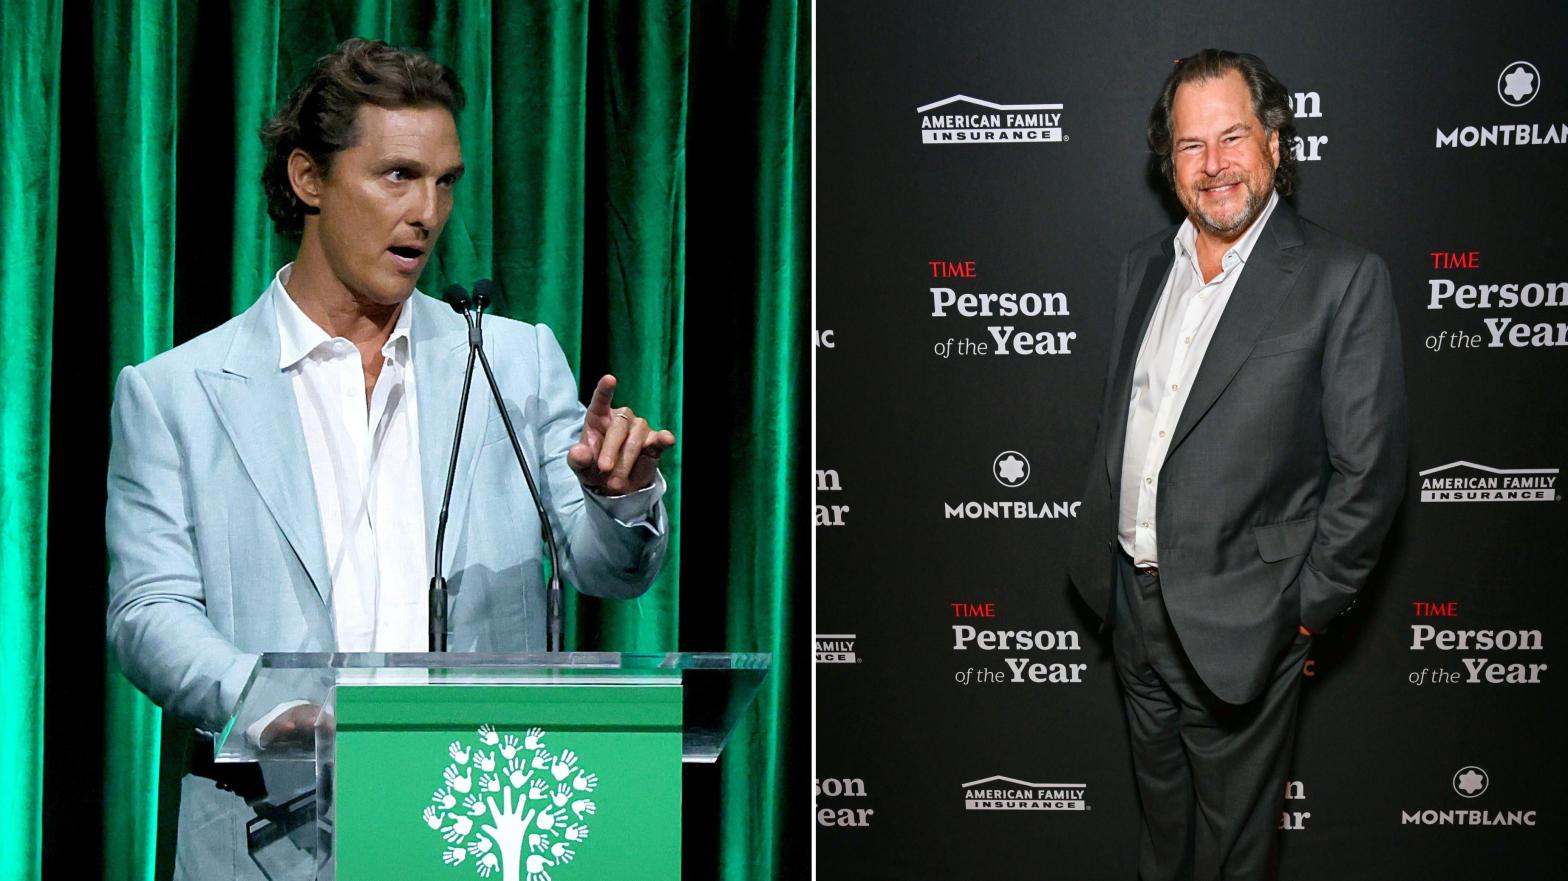 Actor Matthew McConaughey and Salesforce CEO Marc Benioff are reportedly friends. The actor has stayed on as Salesforce promoter despite major layoffs from this past month. (Photo: Dia Dipasupil / Slaven Vlasic / Gizmodo, Getty Images)